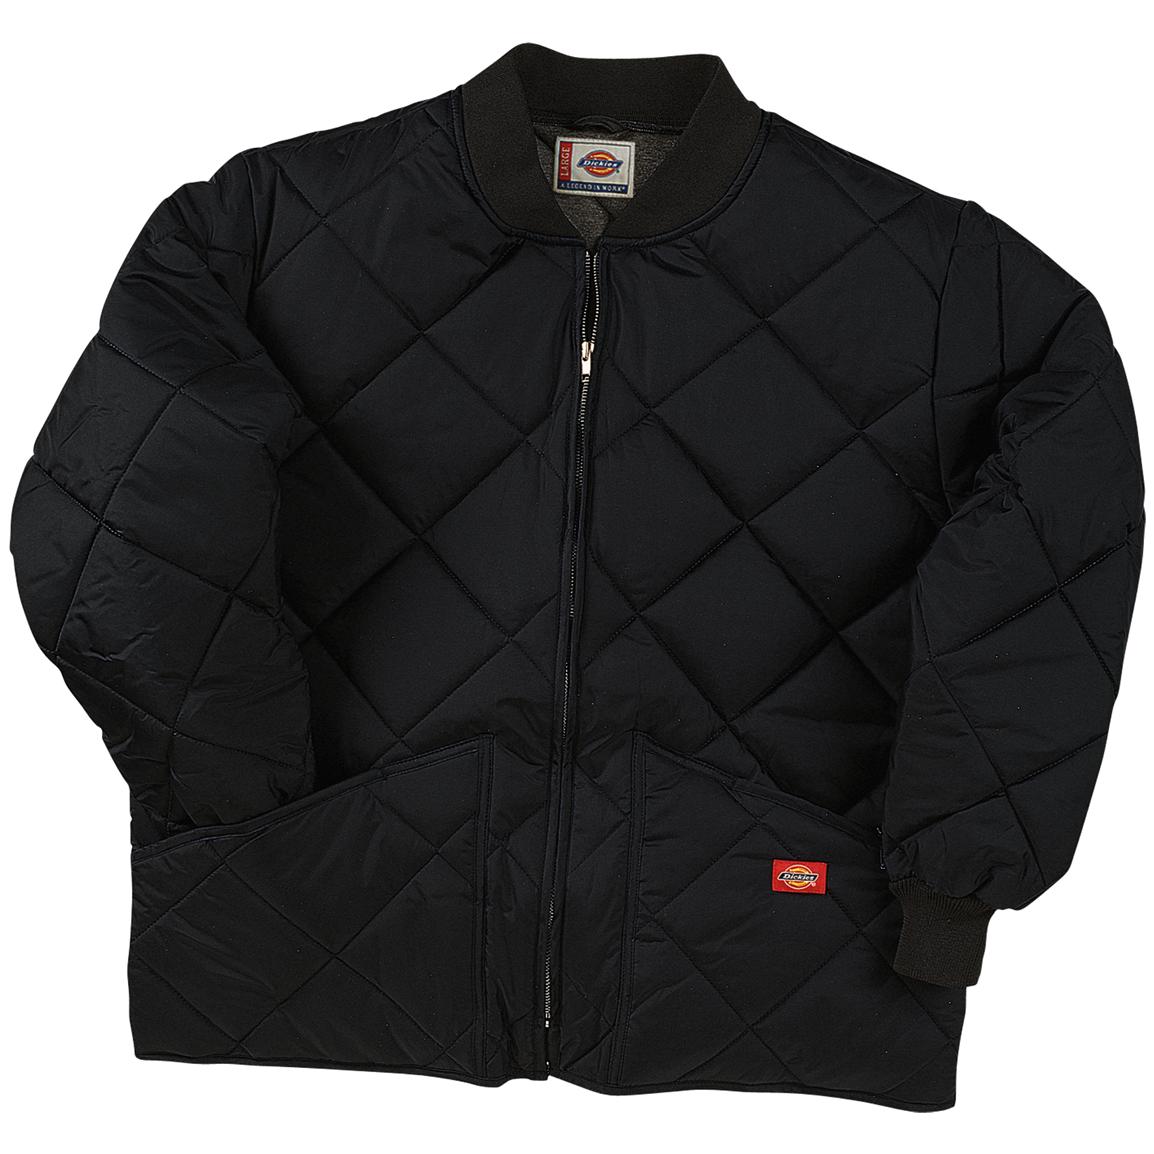 DickiesÂ® Diamond Quilted Nylon Jacket, Tall - 188374, Insulated Jackets & Coats at Sportsman's Guide